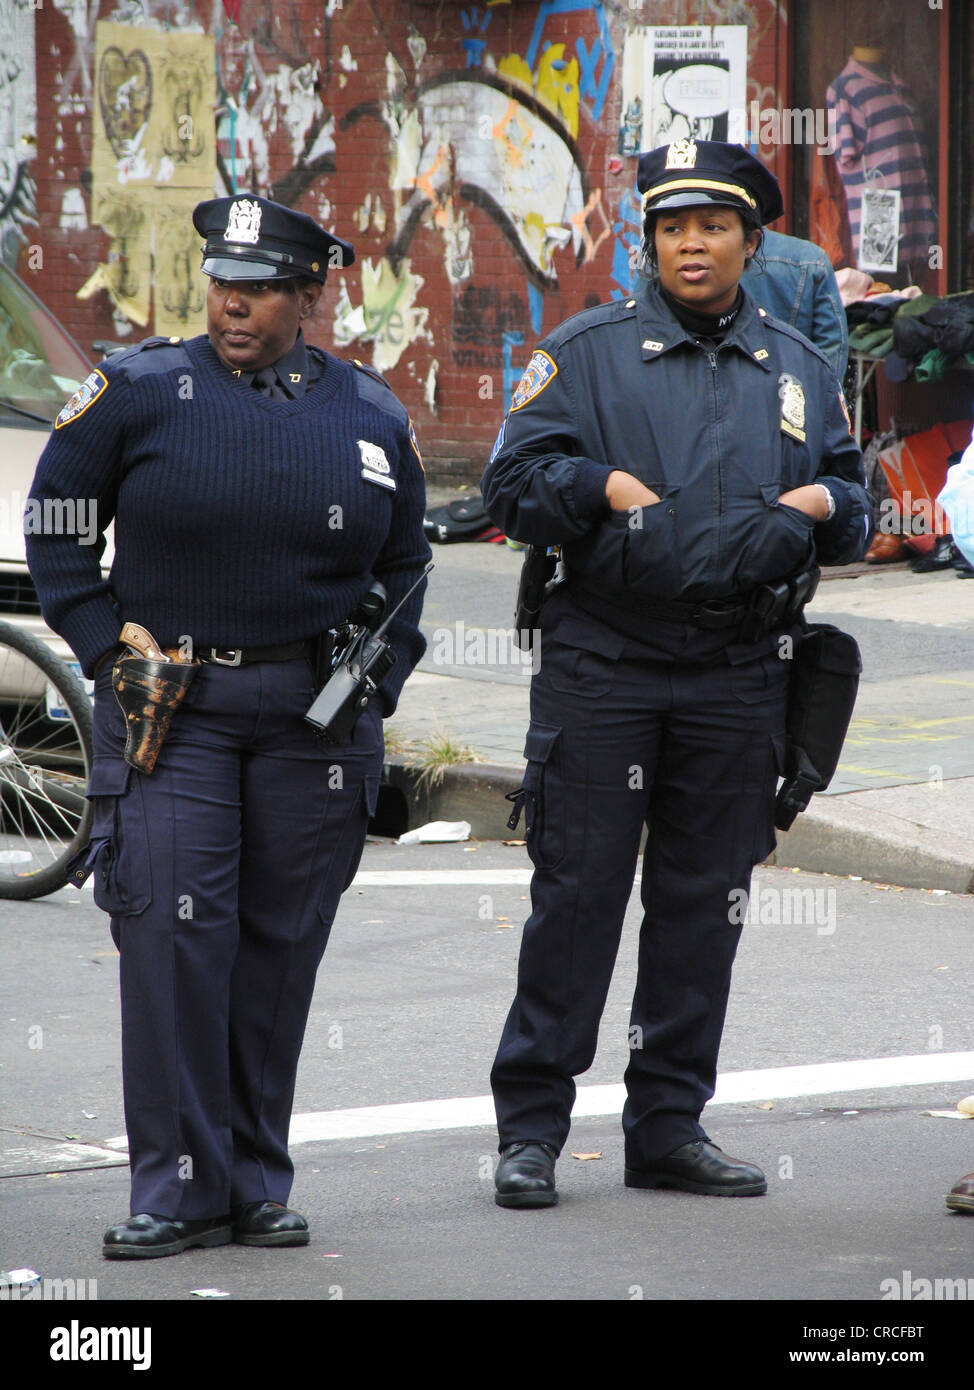 Two police officers with blue uniforms, USA, Brooklyn, New York City Stock  Photo - Alamy